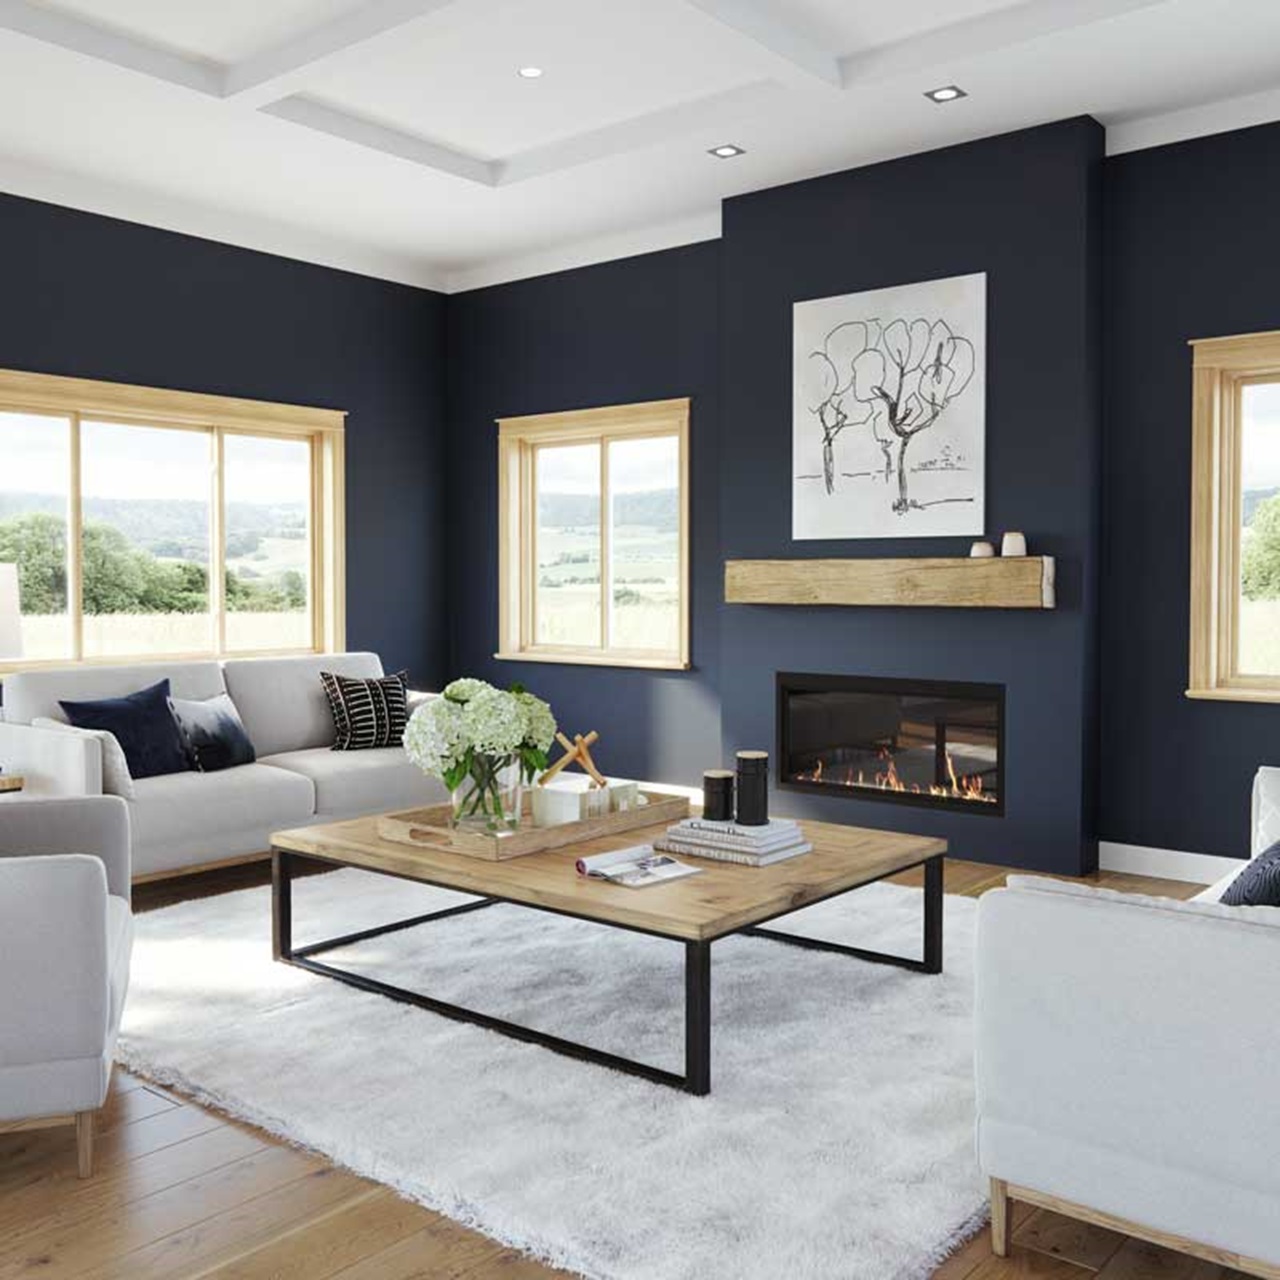 Living room with dark blue walls, seating and wood gliding windows